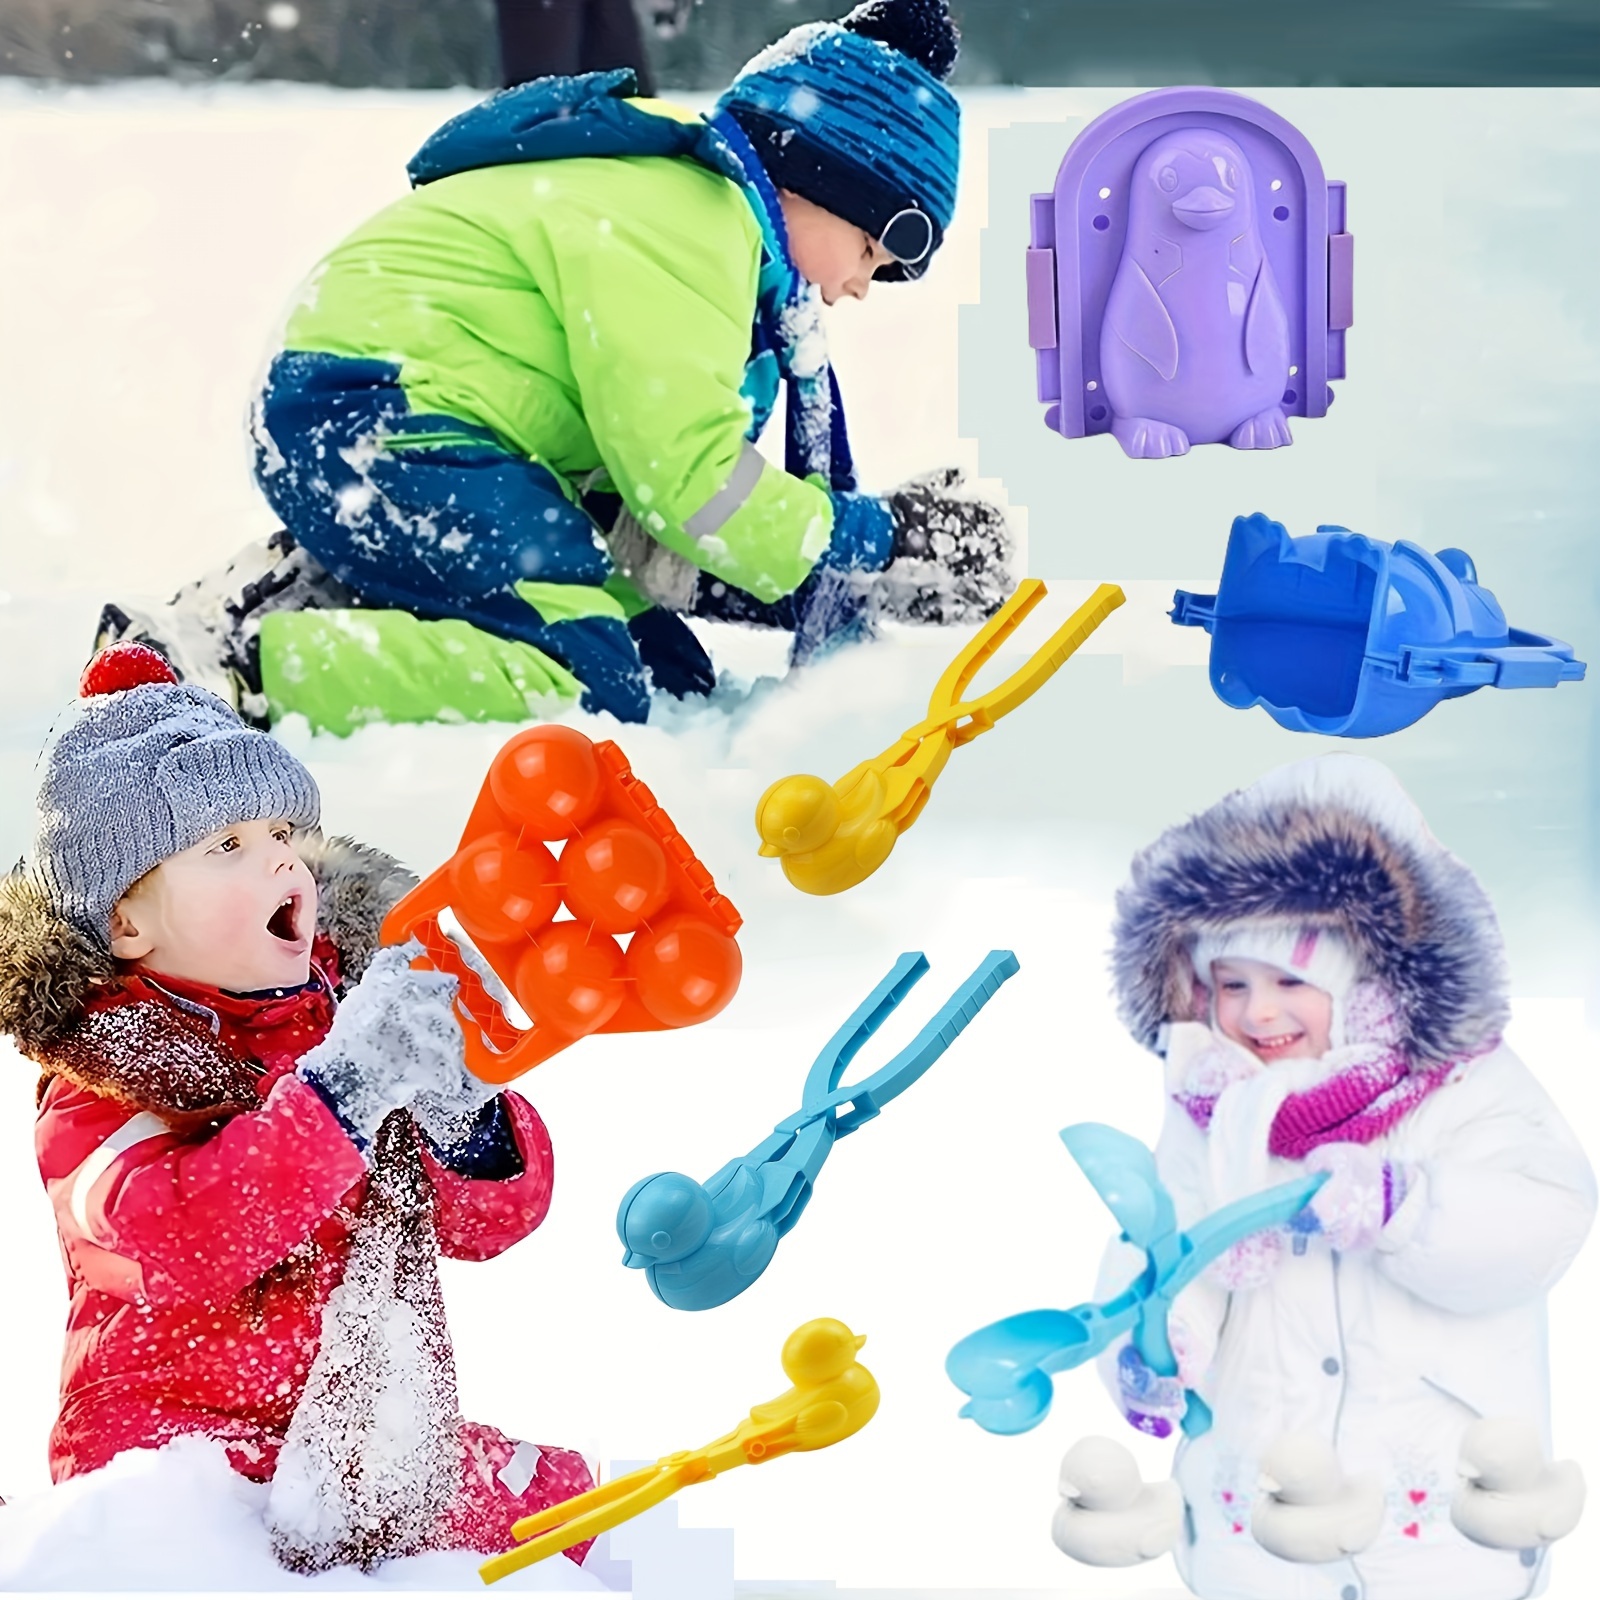 Fun Little Toys Snowball Maker Toys, Snow Molds for Kids Outdoor